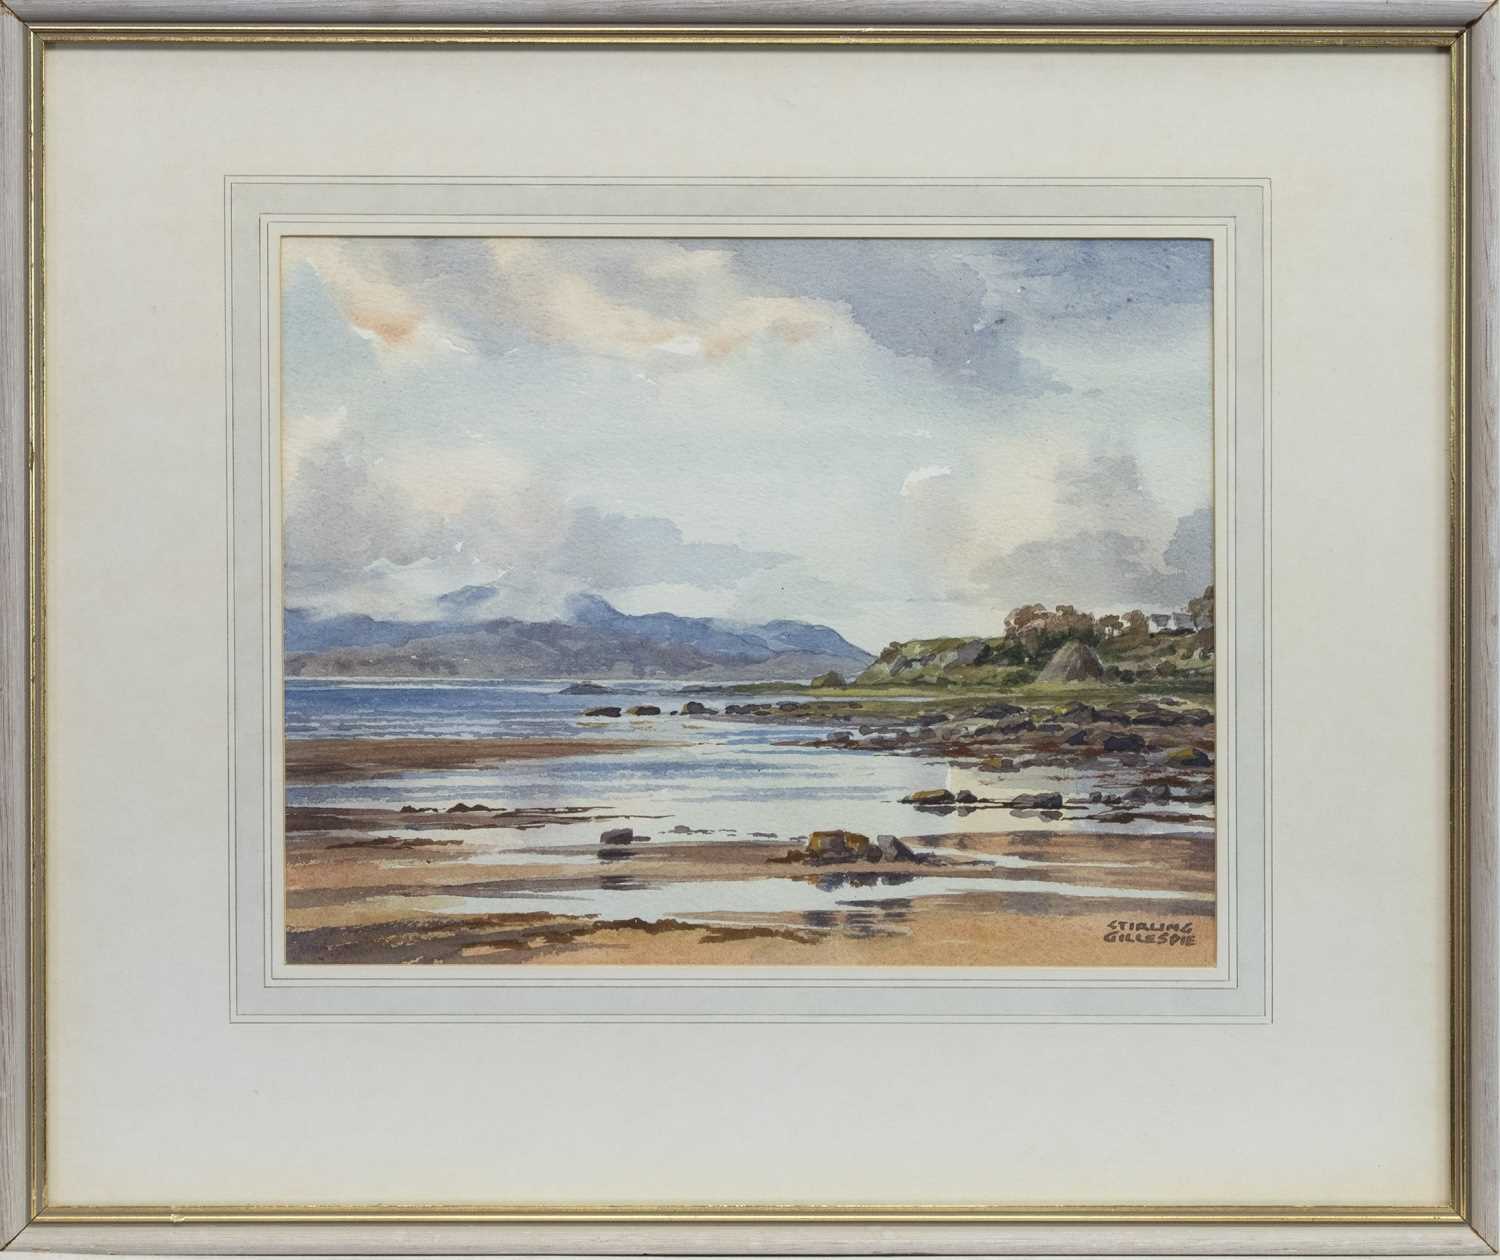 Lot 634 - TORWOOD, ROTHESAY, A WATERCOLOUR BY STIRLING GILLESPIE